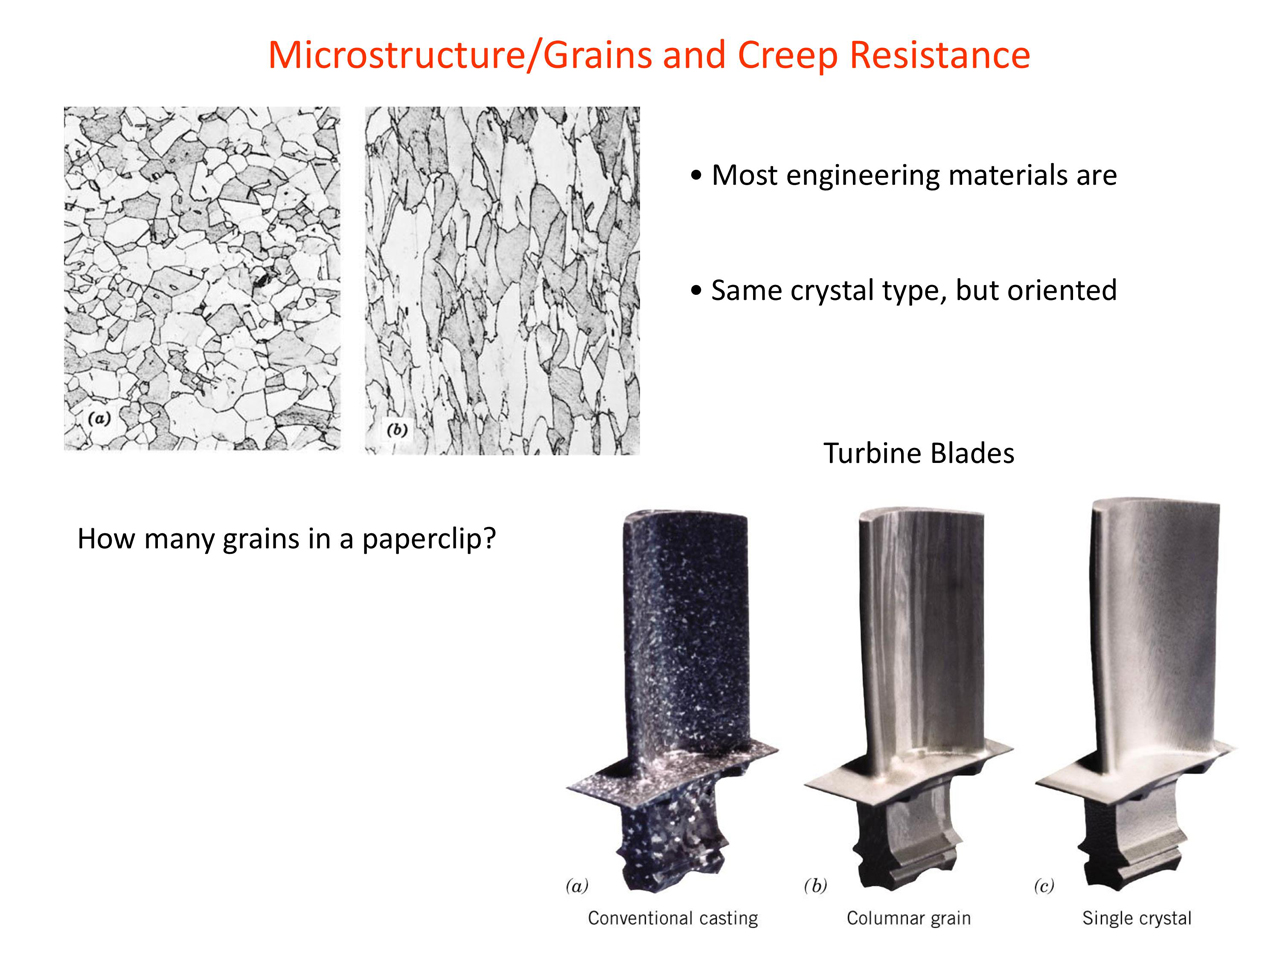 Microstructure/Grains and Creep Resistance